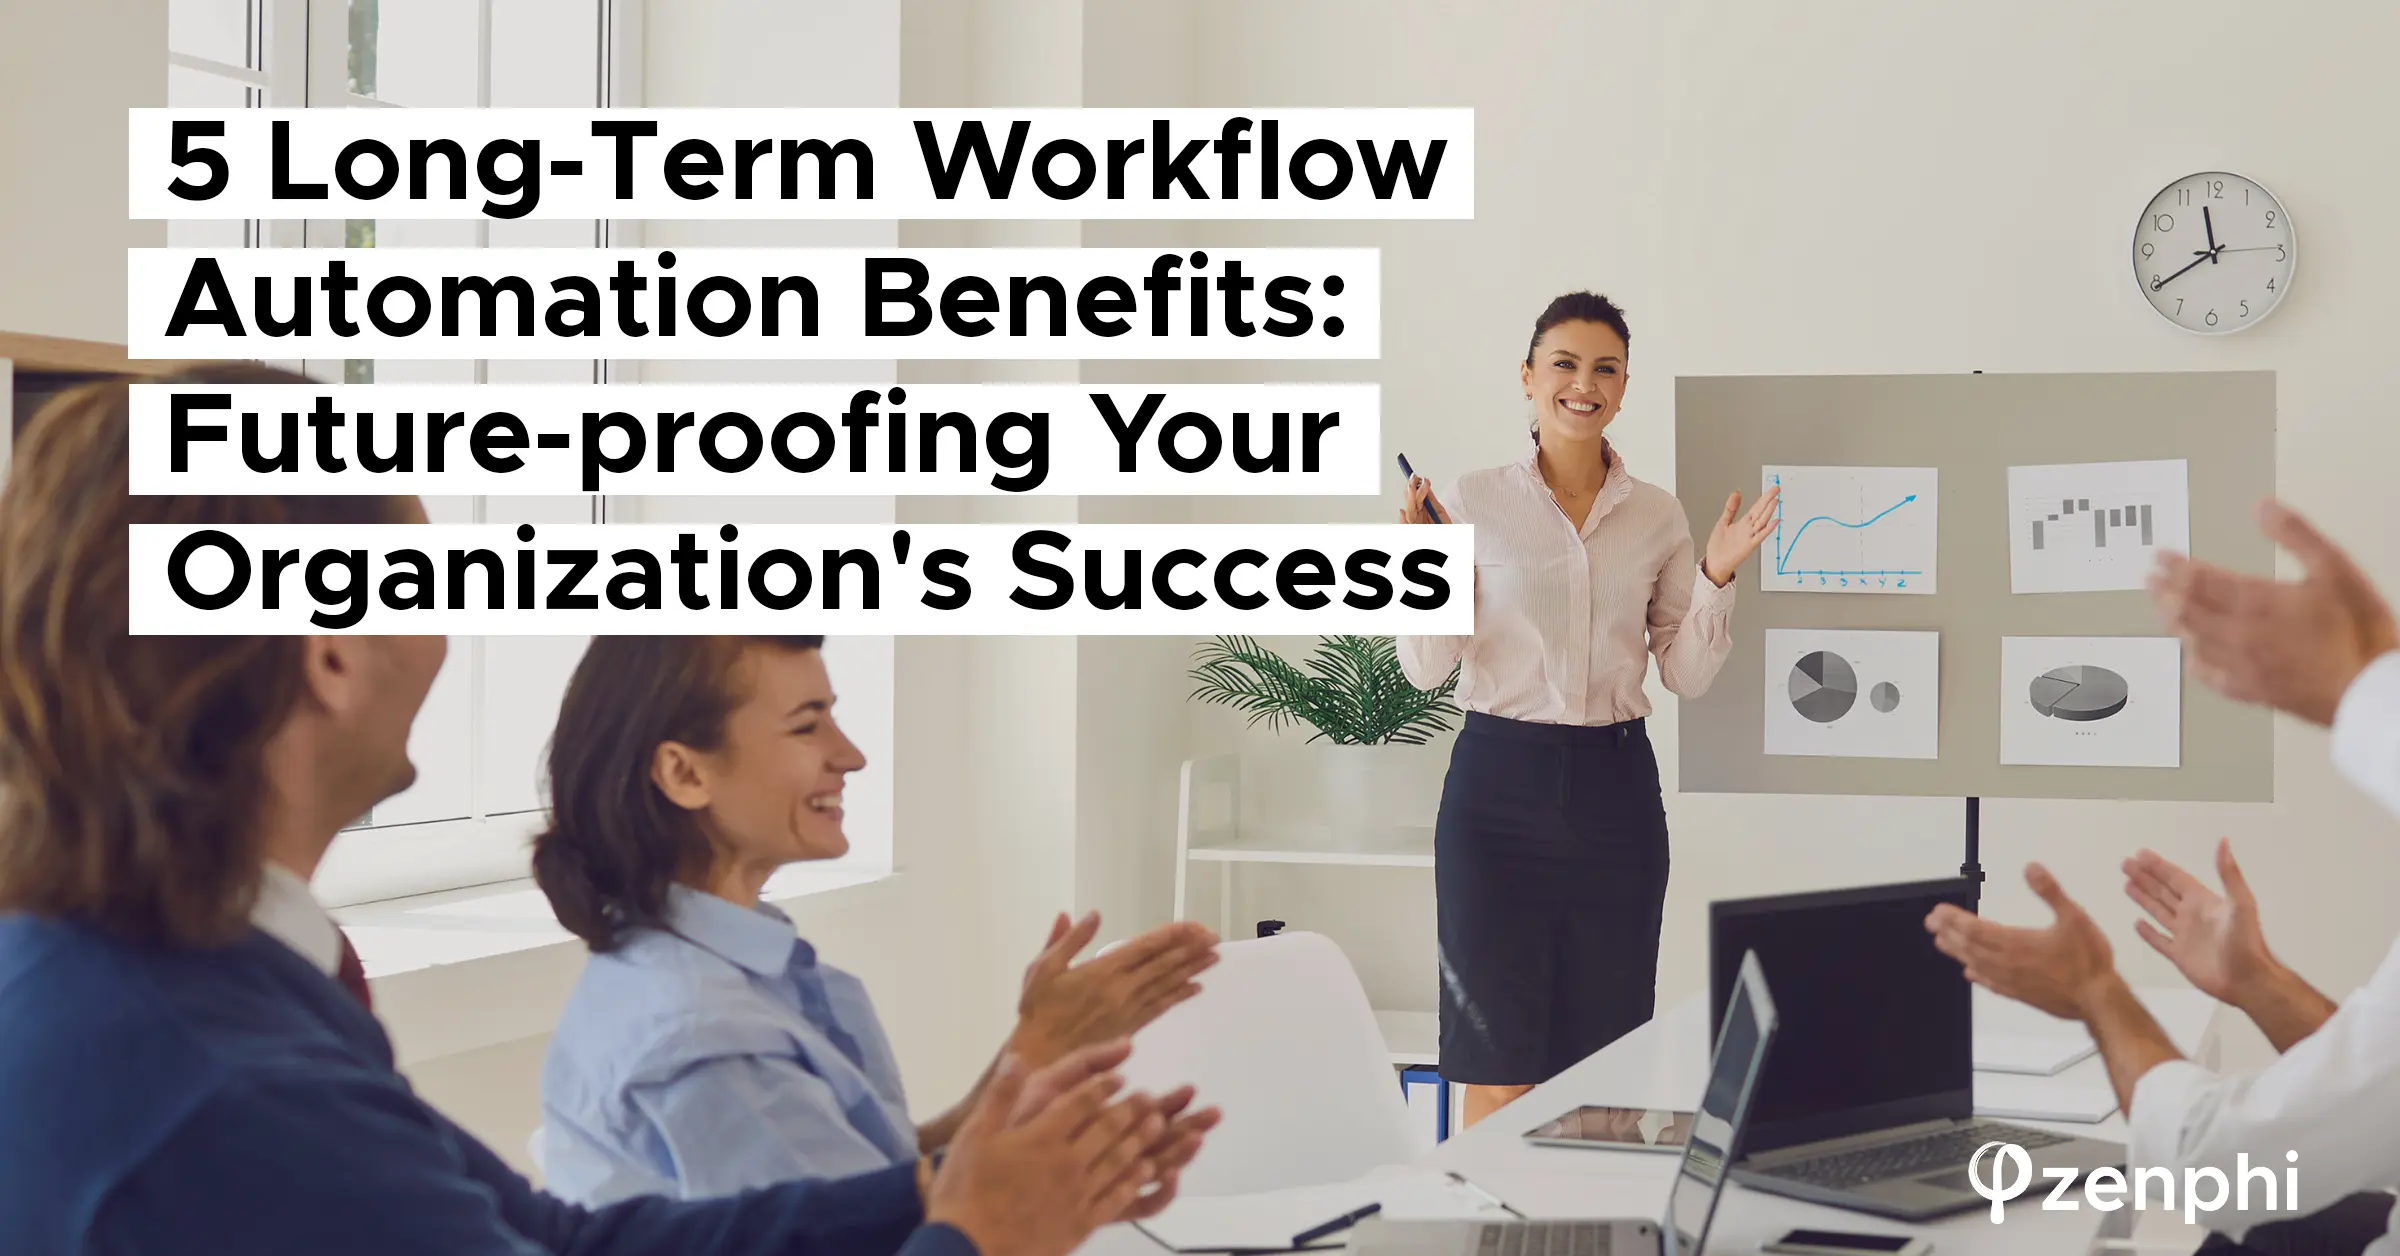 5 Long-Term Workflow Automation Benefits: Future-proofing Your Organization's Success